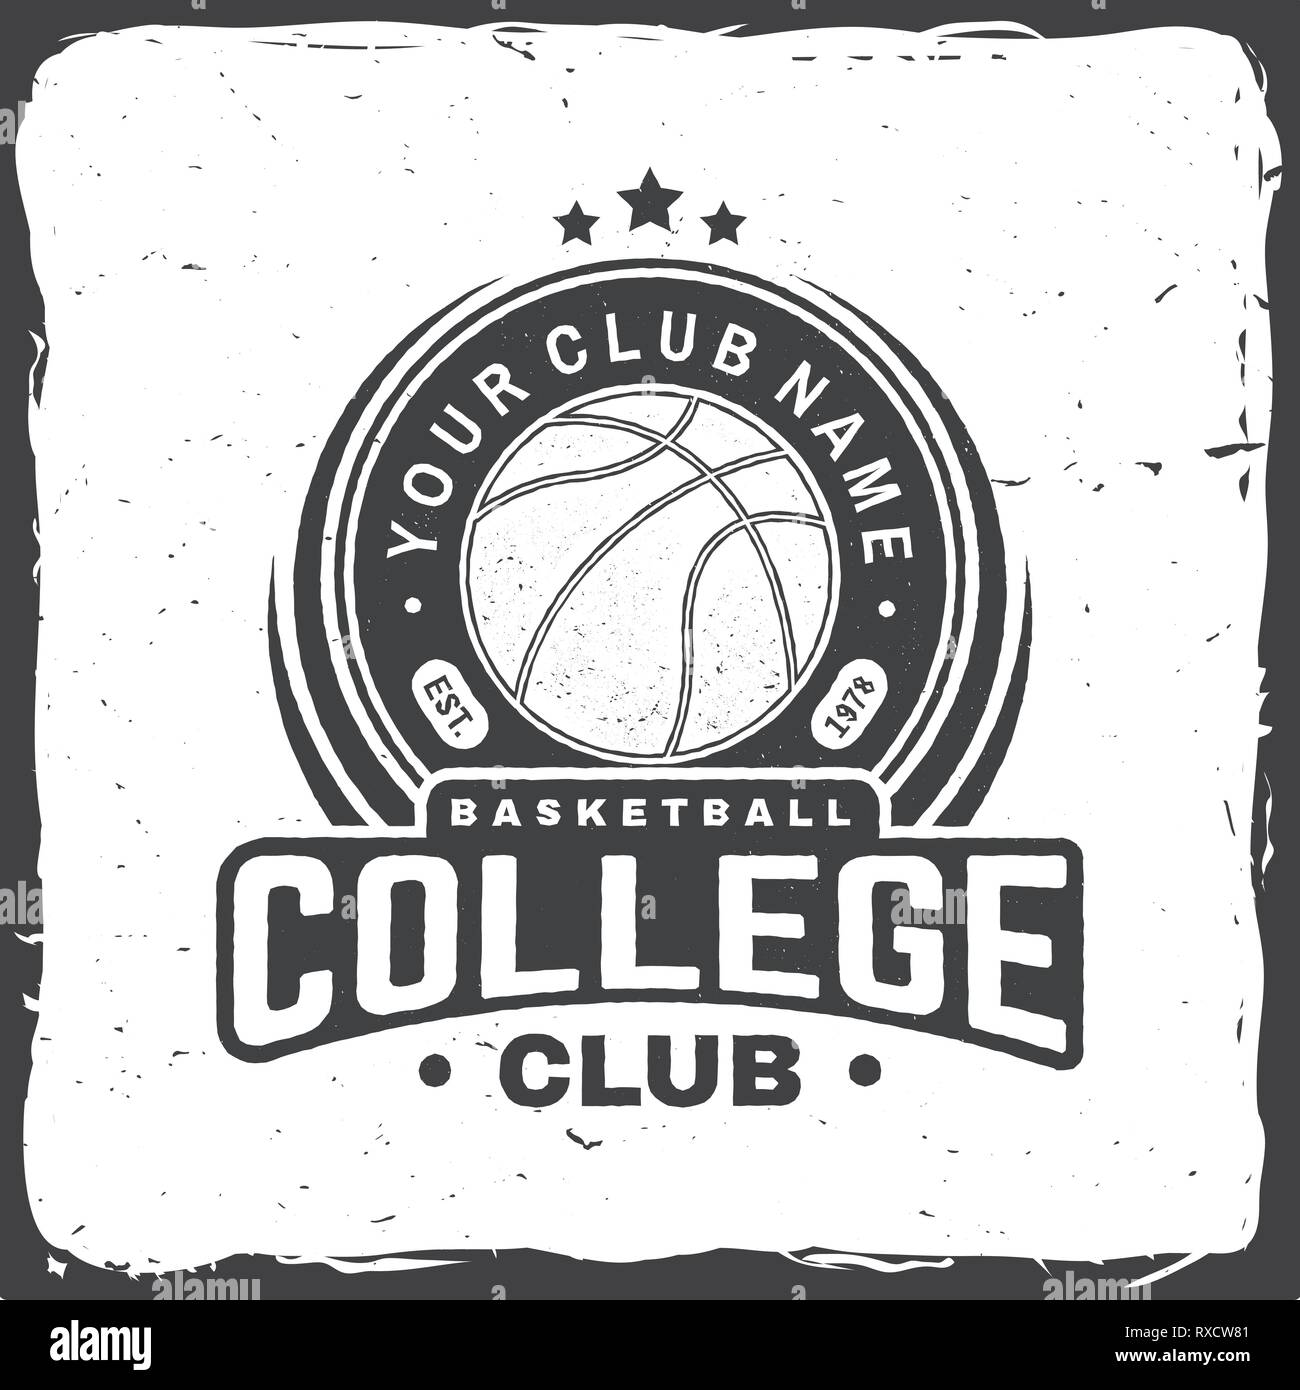 Basketball college club badge. Vector illustration. Concept for shirt, print, stamp or tee. Vintage typography design with basketball ball silhouette. Stock Vector